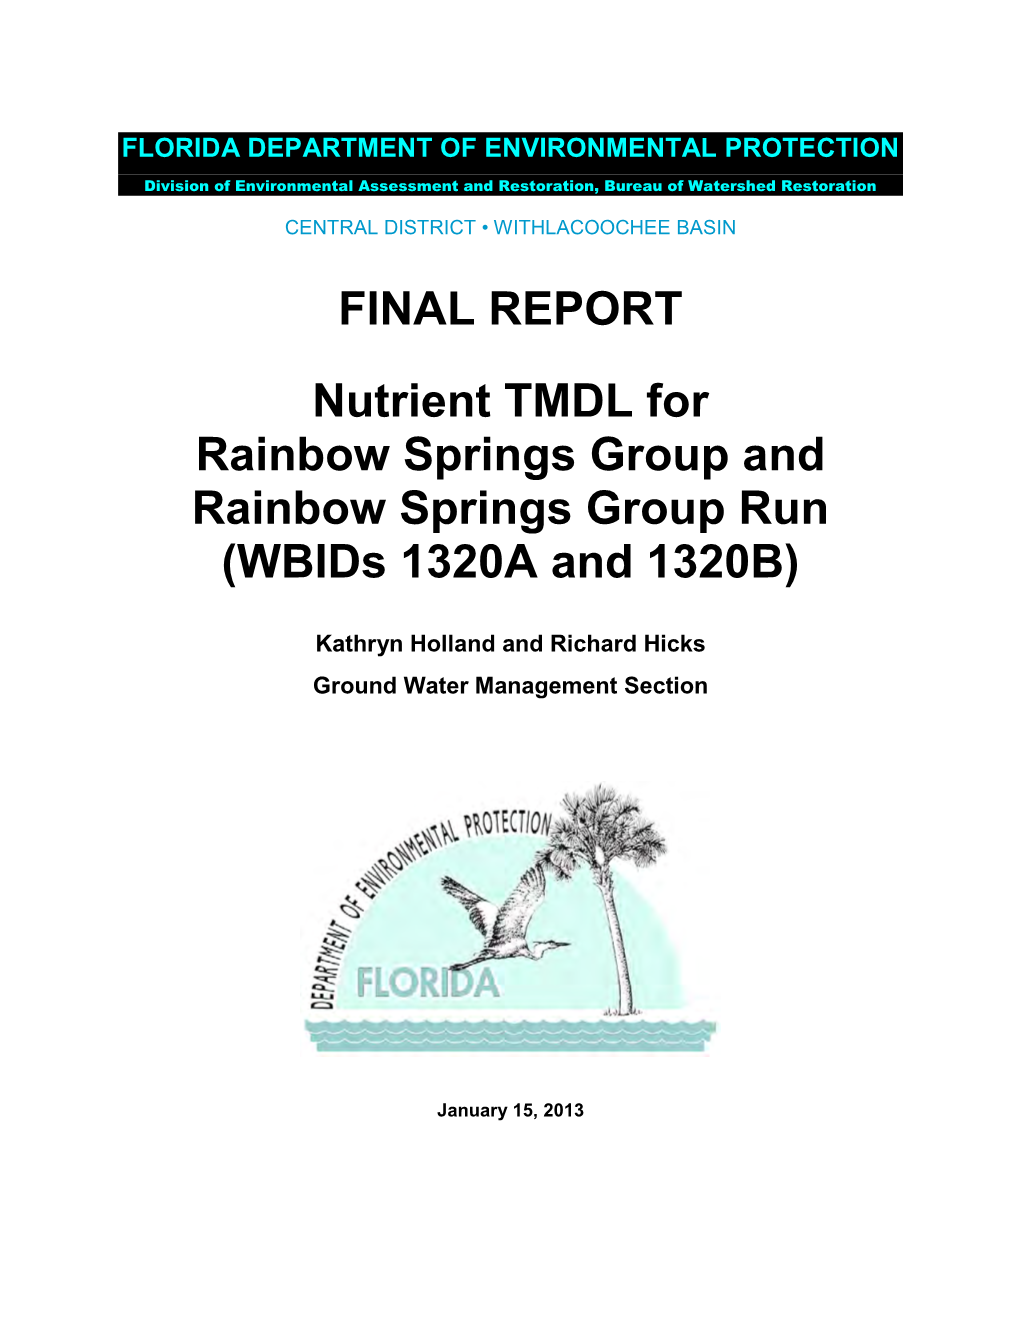 (Nutrients) As the TMDL for Rainbow Springs Group